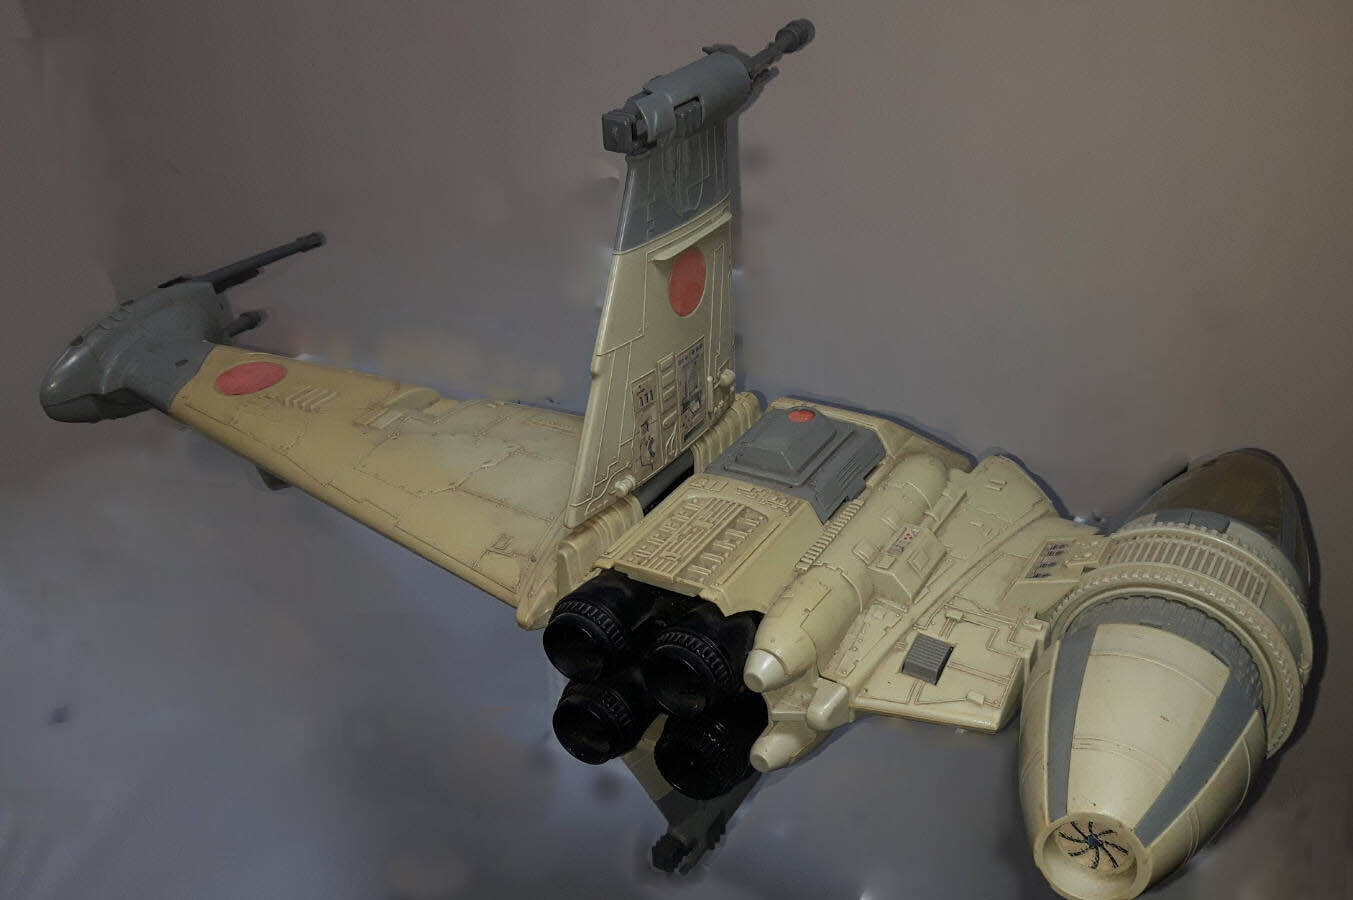 Kenner B-Wing Fighter rear view